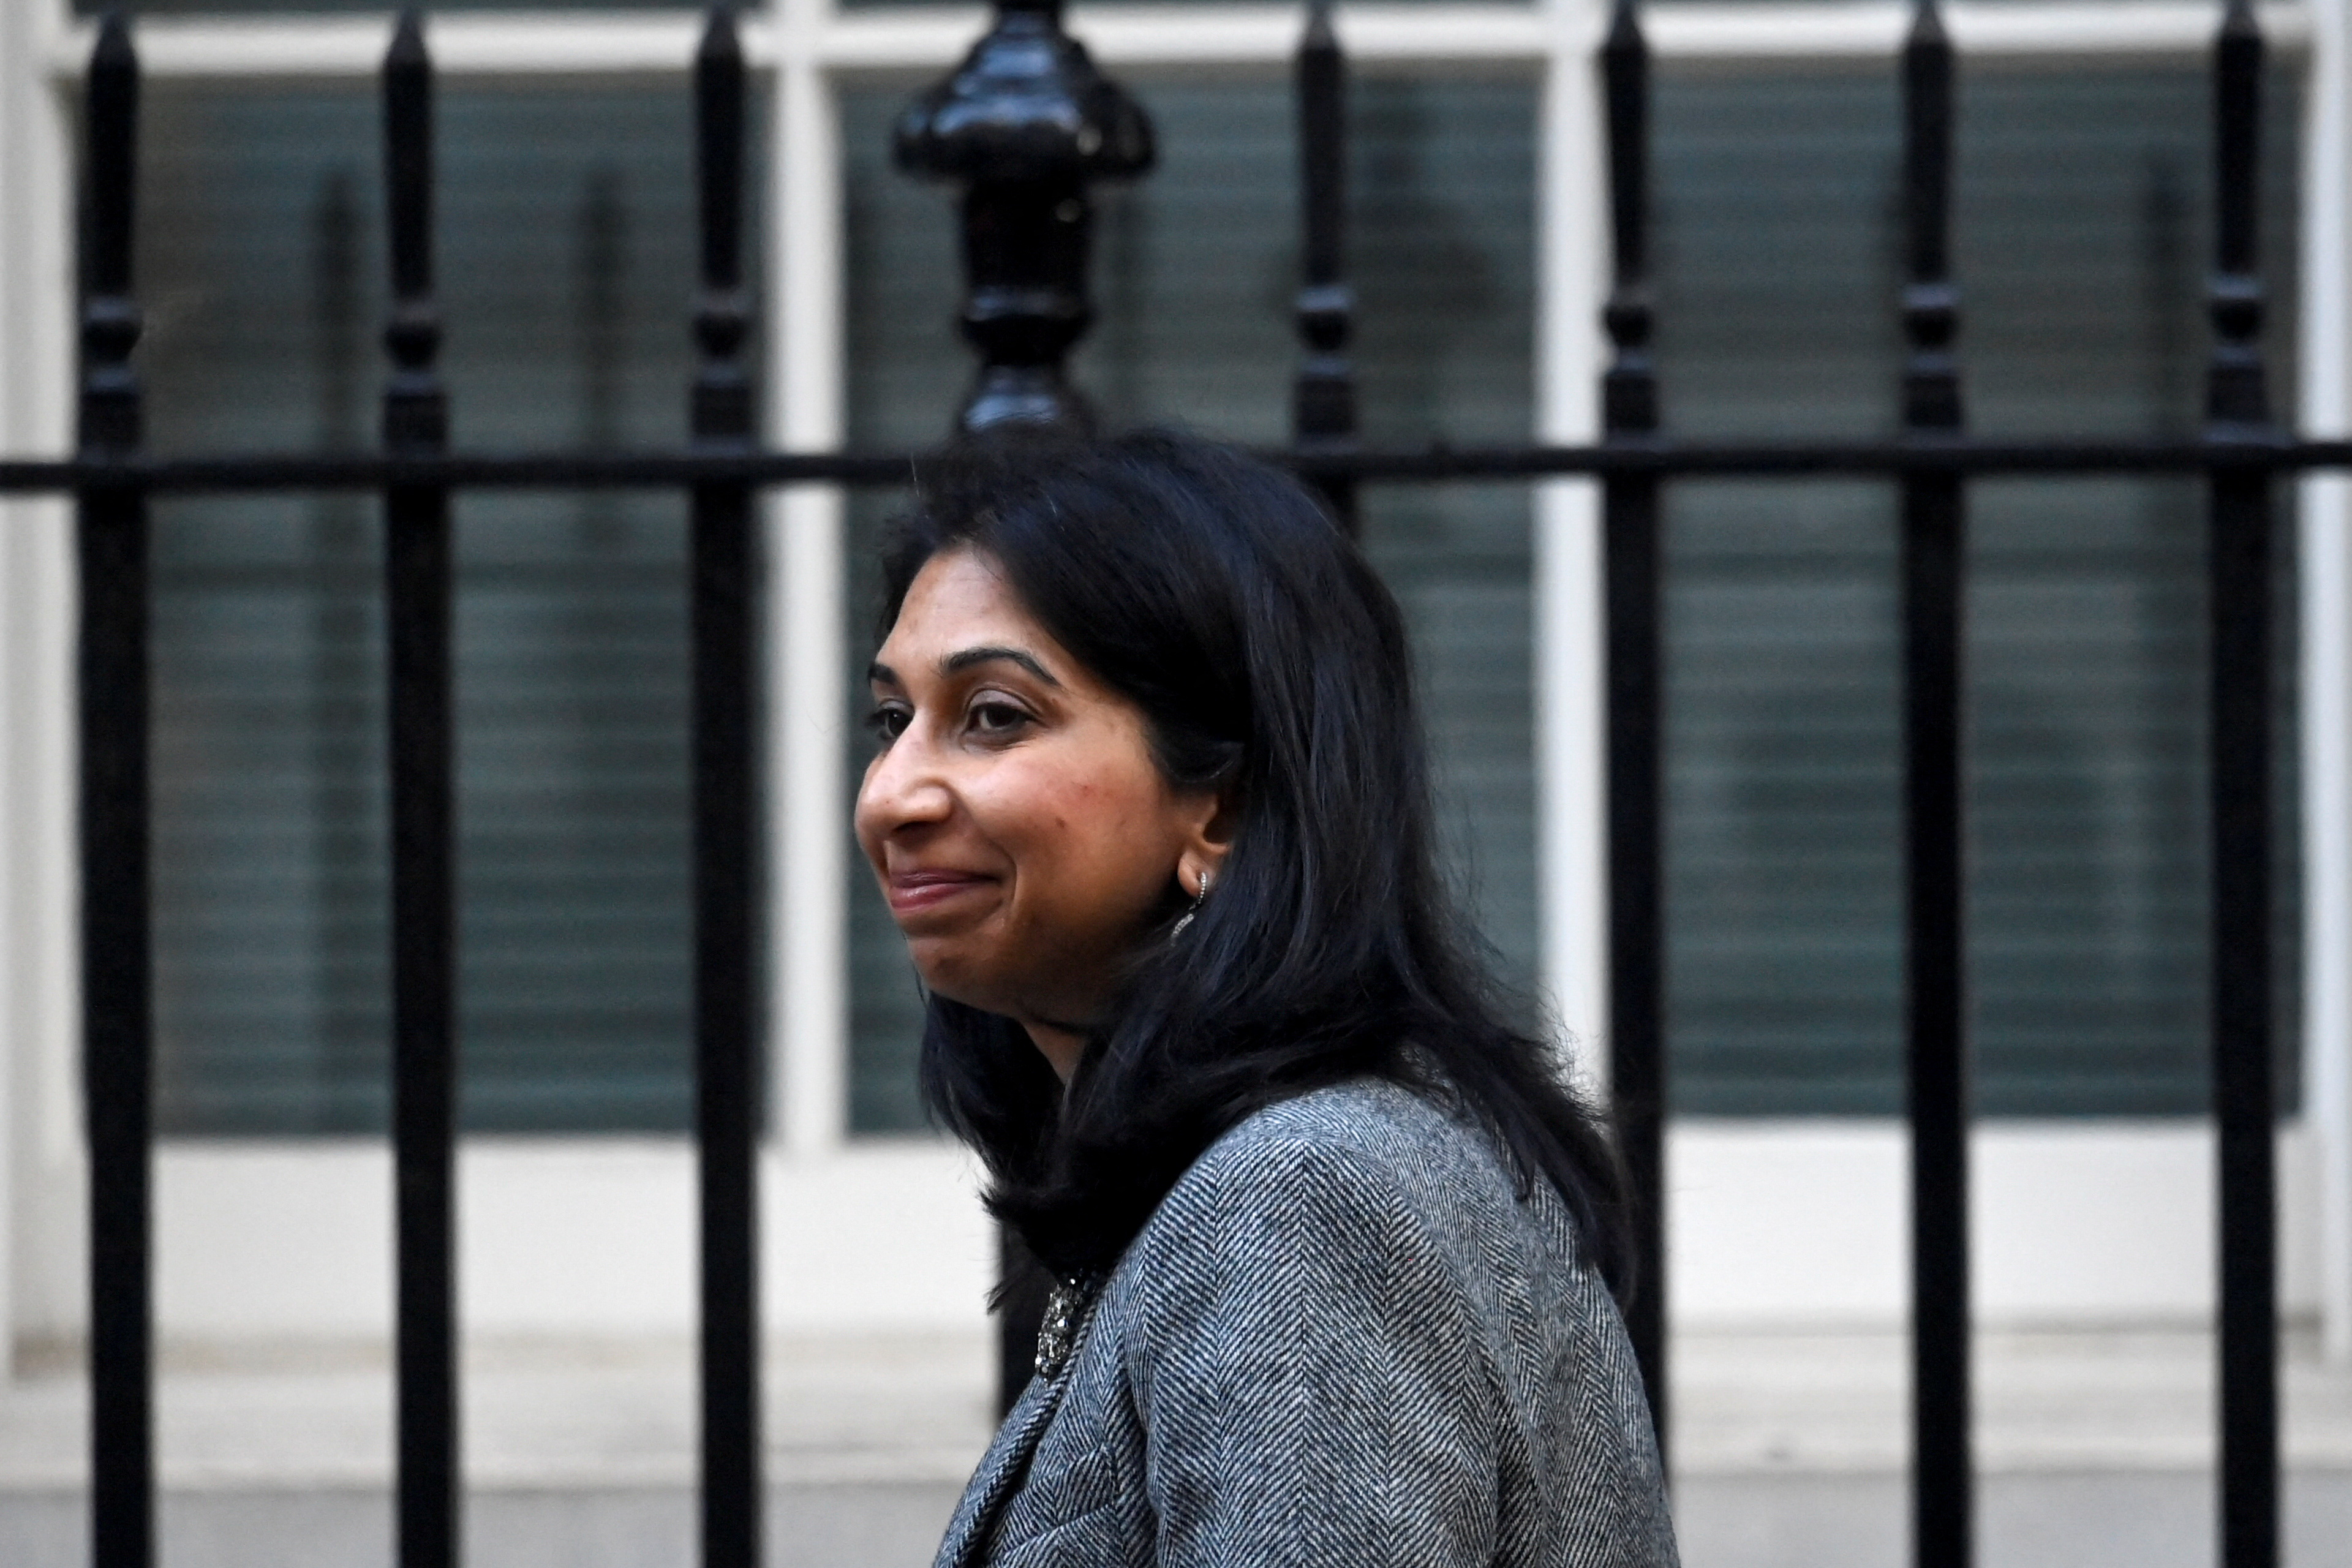  Suella Braverman in Downing Street. Toby Melville/Reuters